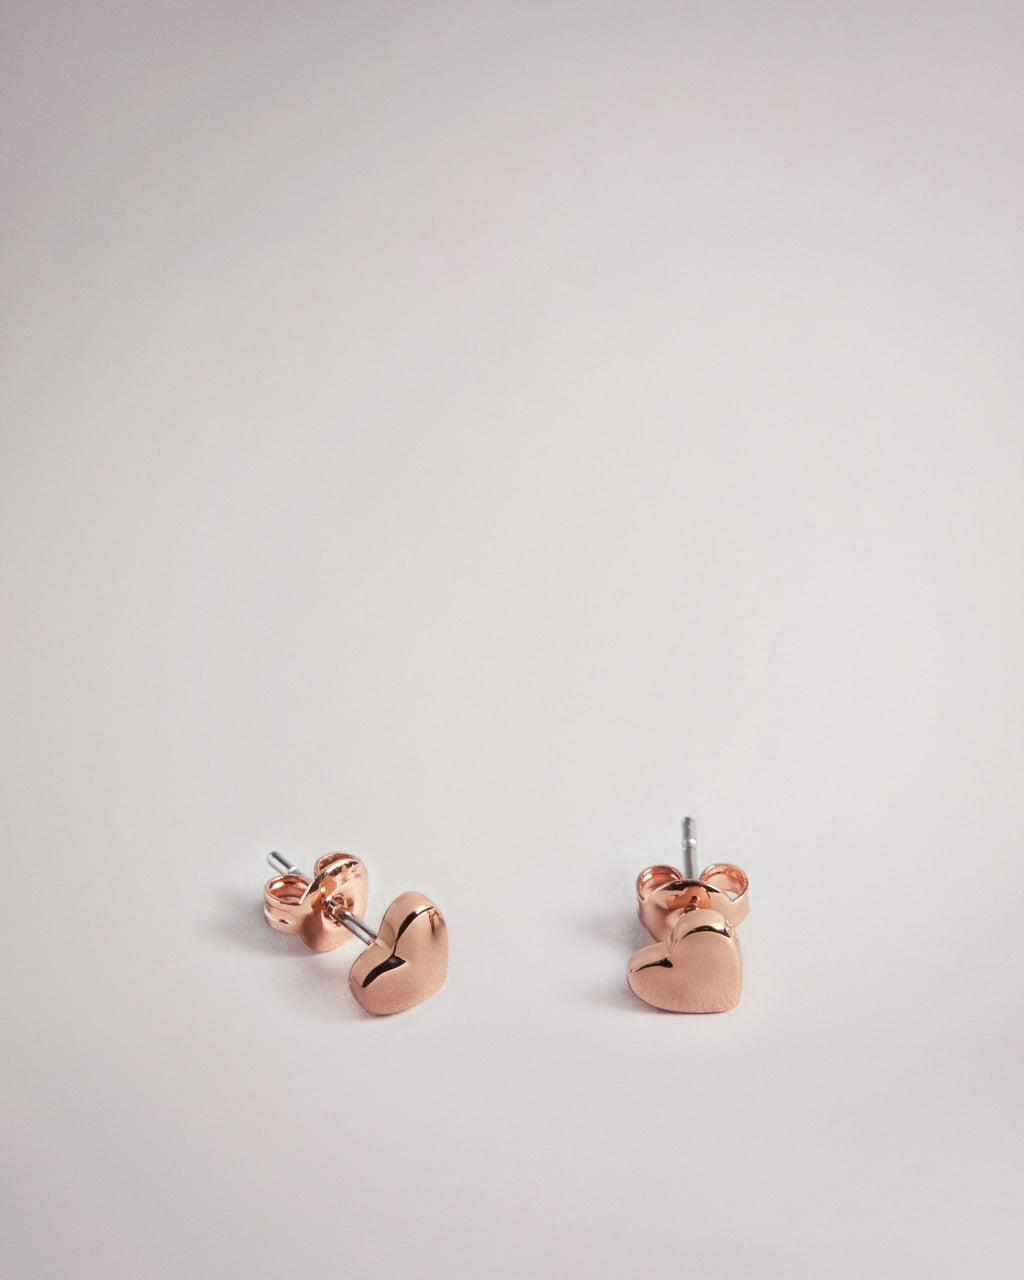 Amoria Sweetheart Gift Set in Rose Gold | eightywingold - official partner of Ted Baker